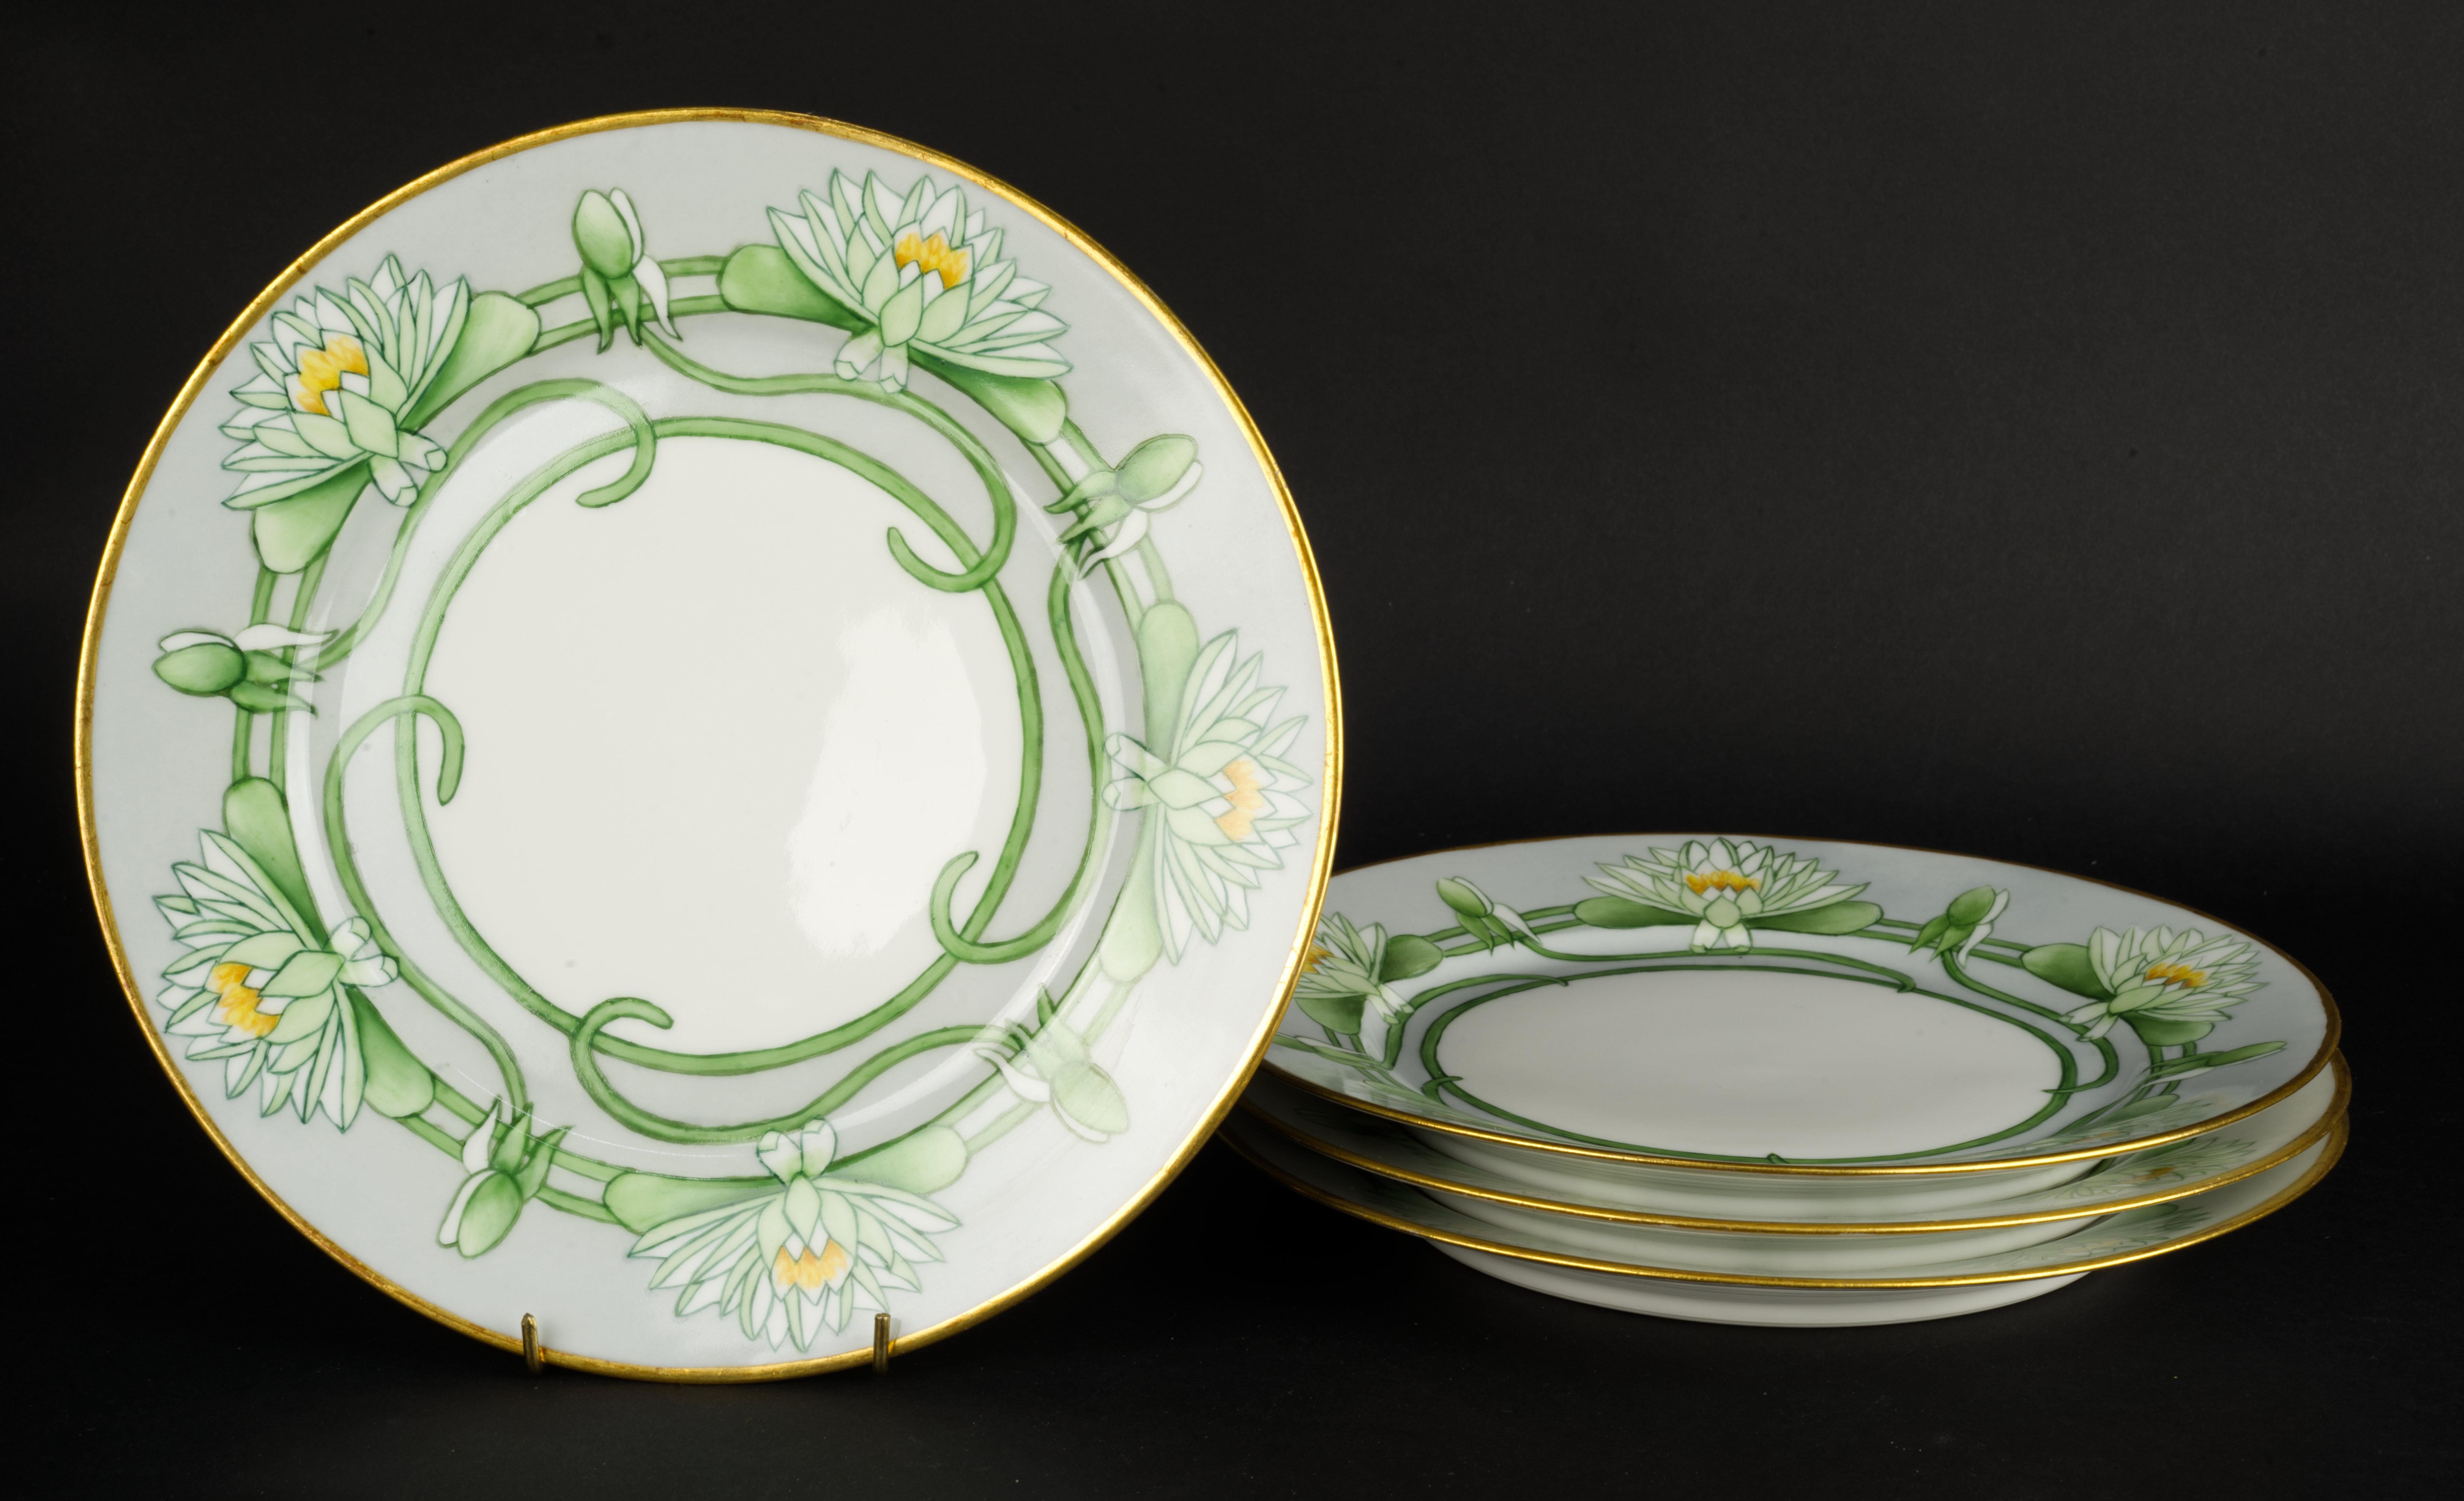  Set of 4 unique, antique plates was made by Haviland & Cie in Limoges, France. The plates were hand painted by a professional artist in a decorating studio with Art Deco motif of five water lilies on pale blue background. Calm blue and green colors